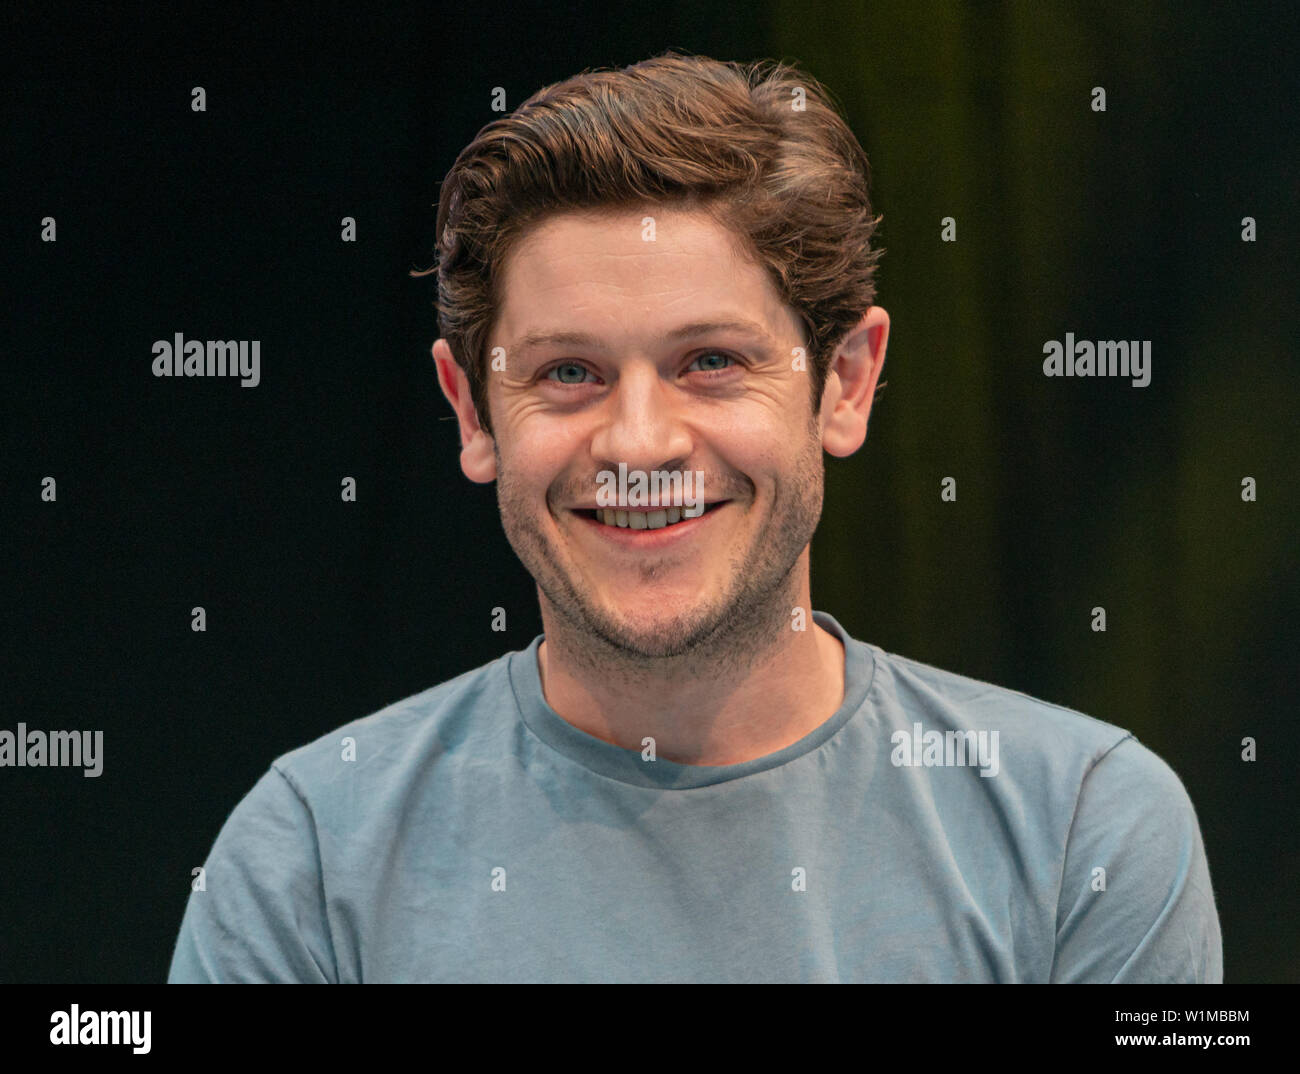 STUTTGART, GERMANY - JUN 29th 2019: Iwan Rheon (*1985, Welsh actor, singer and musician) talks about his experiences in the movie industry at Comic Con Germany Stuttgart, a two day fan convention Stock Photo